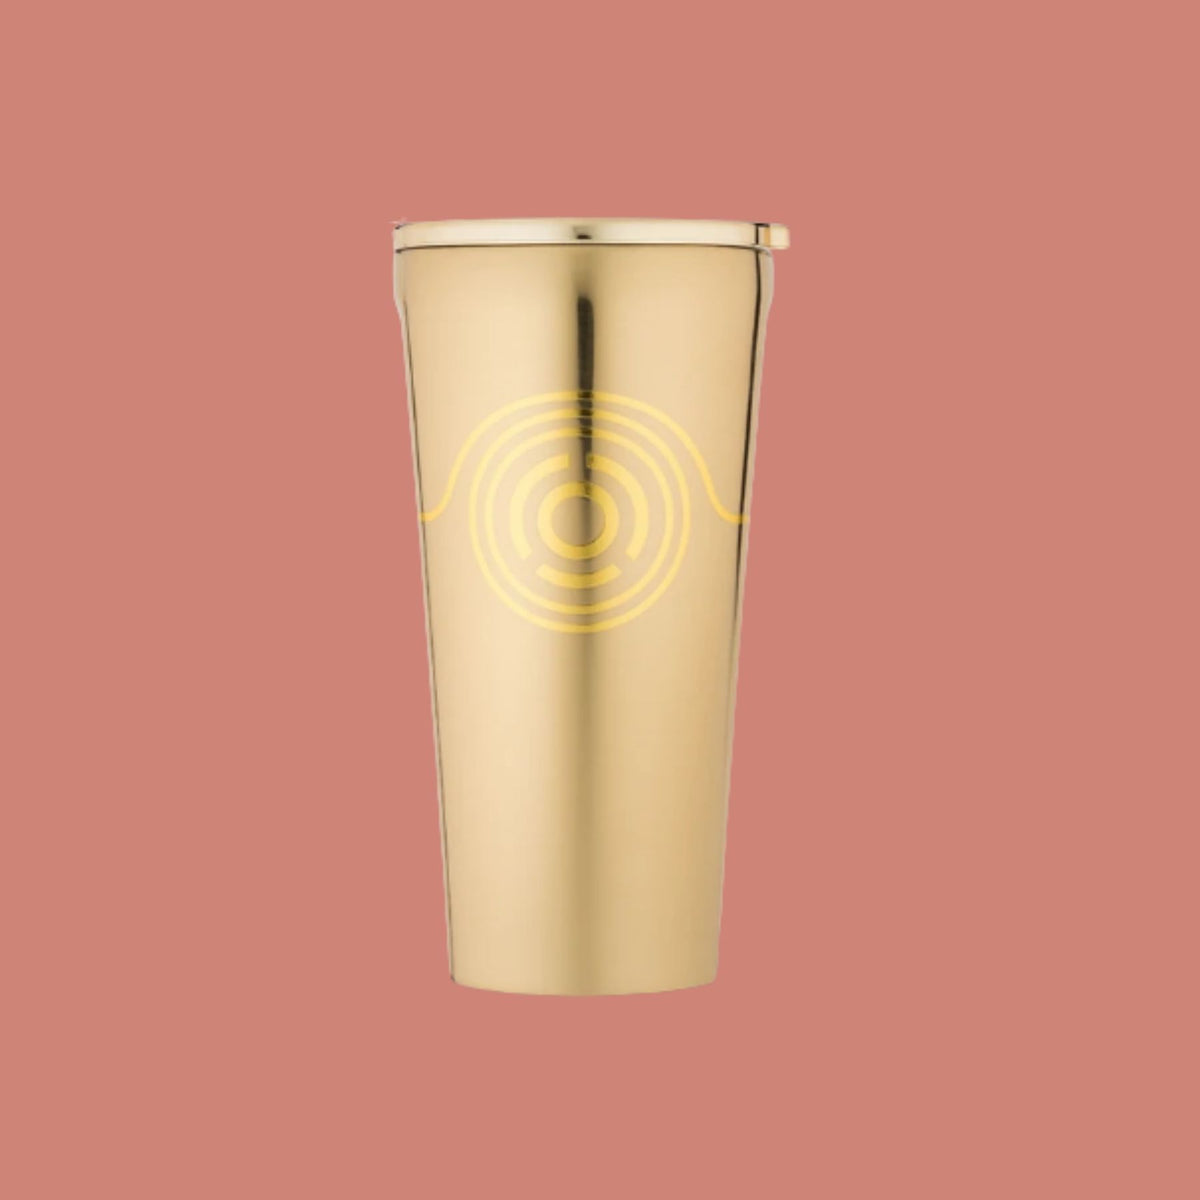 C-3PO Stainless Steel Tumbler by Corkcicle – Star Wars